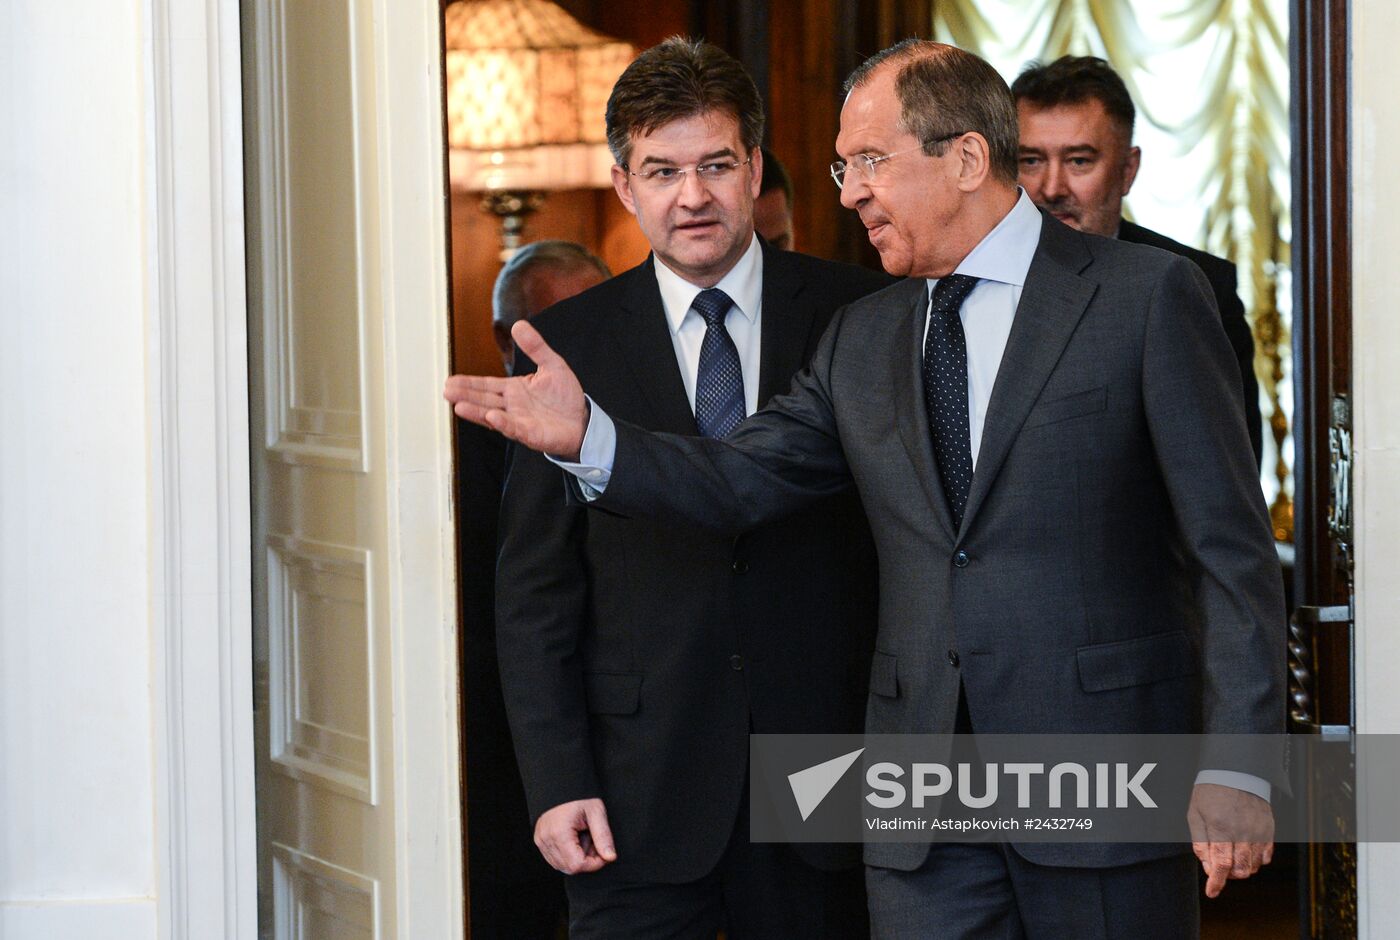 Meeting of Russian Foreign Minister Sergei Lavrov and his Slovak counterpart Miroslav Lajčák